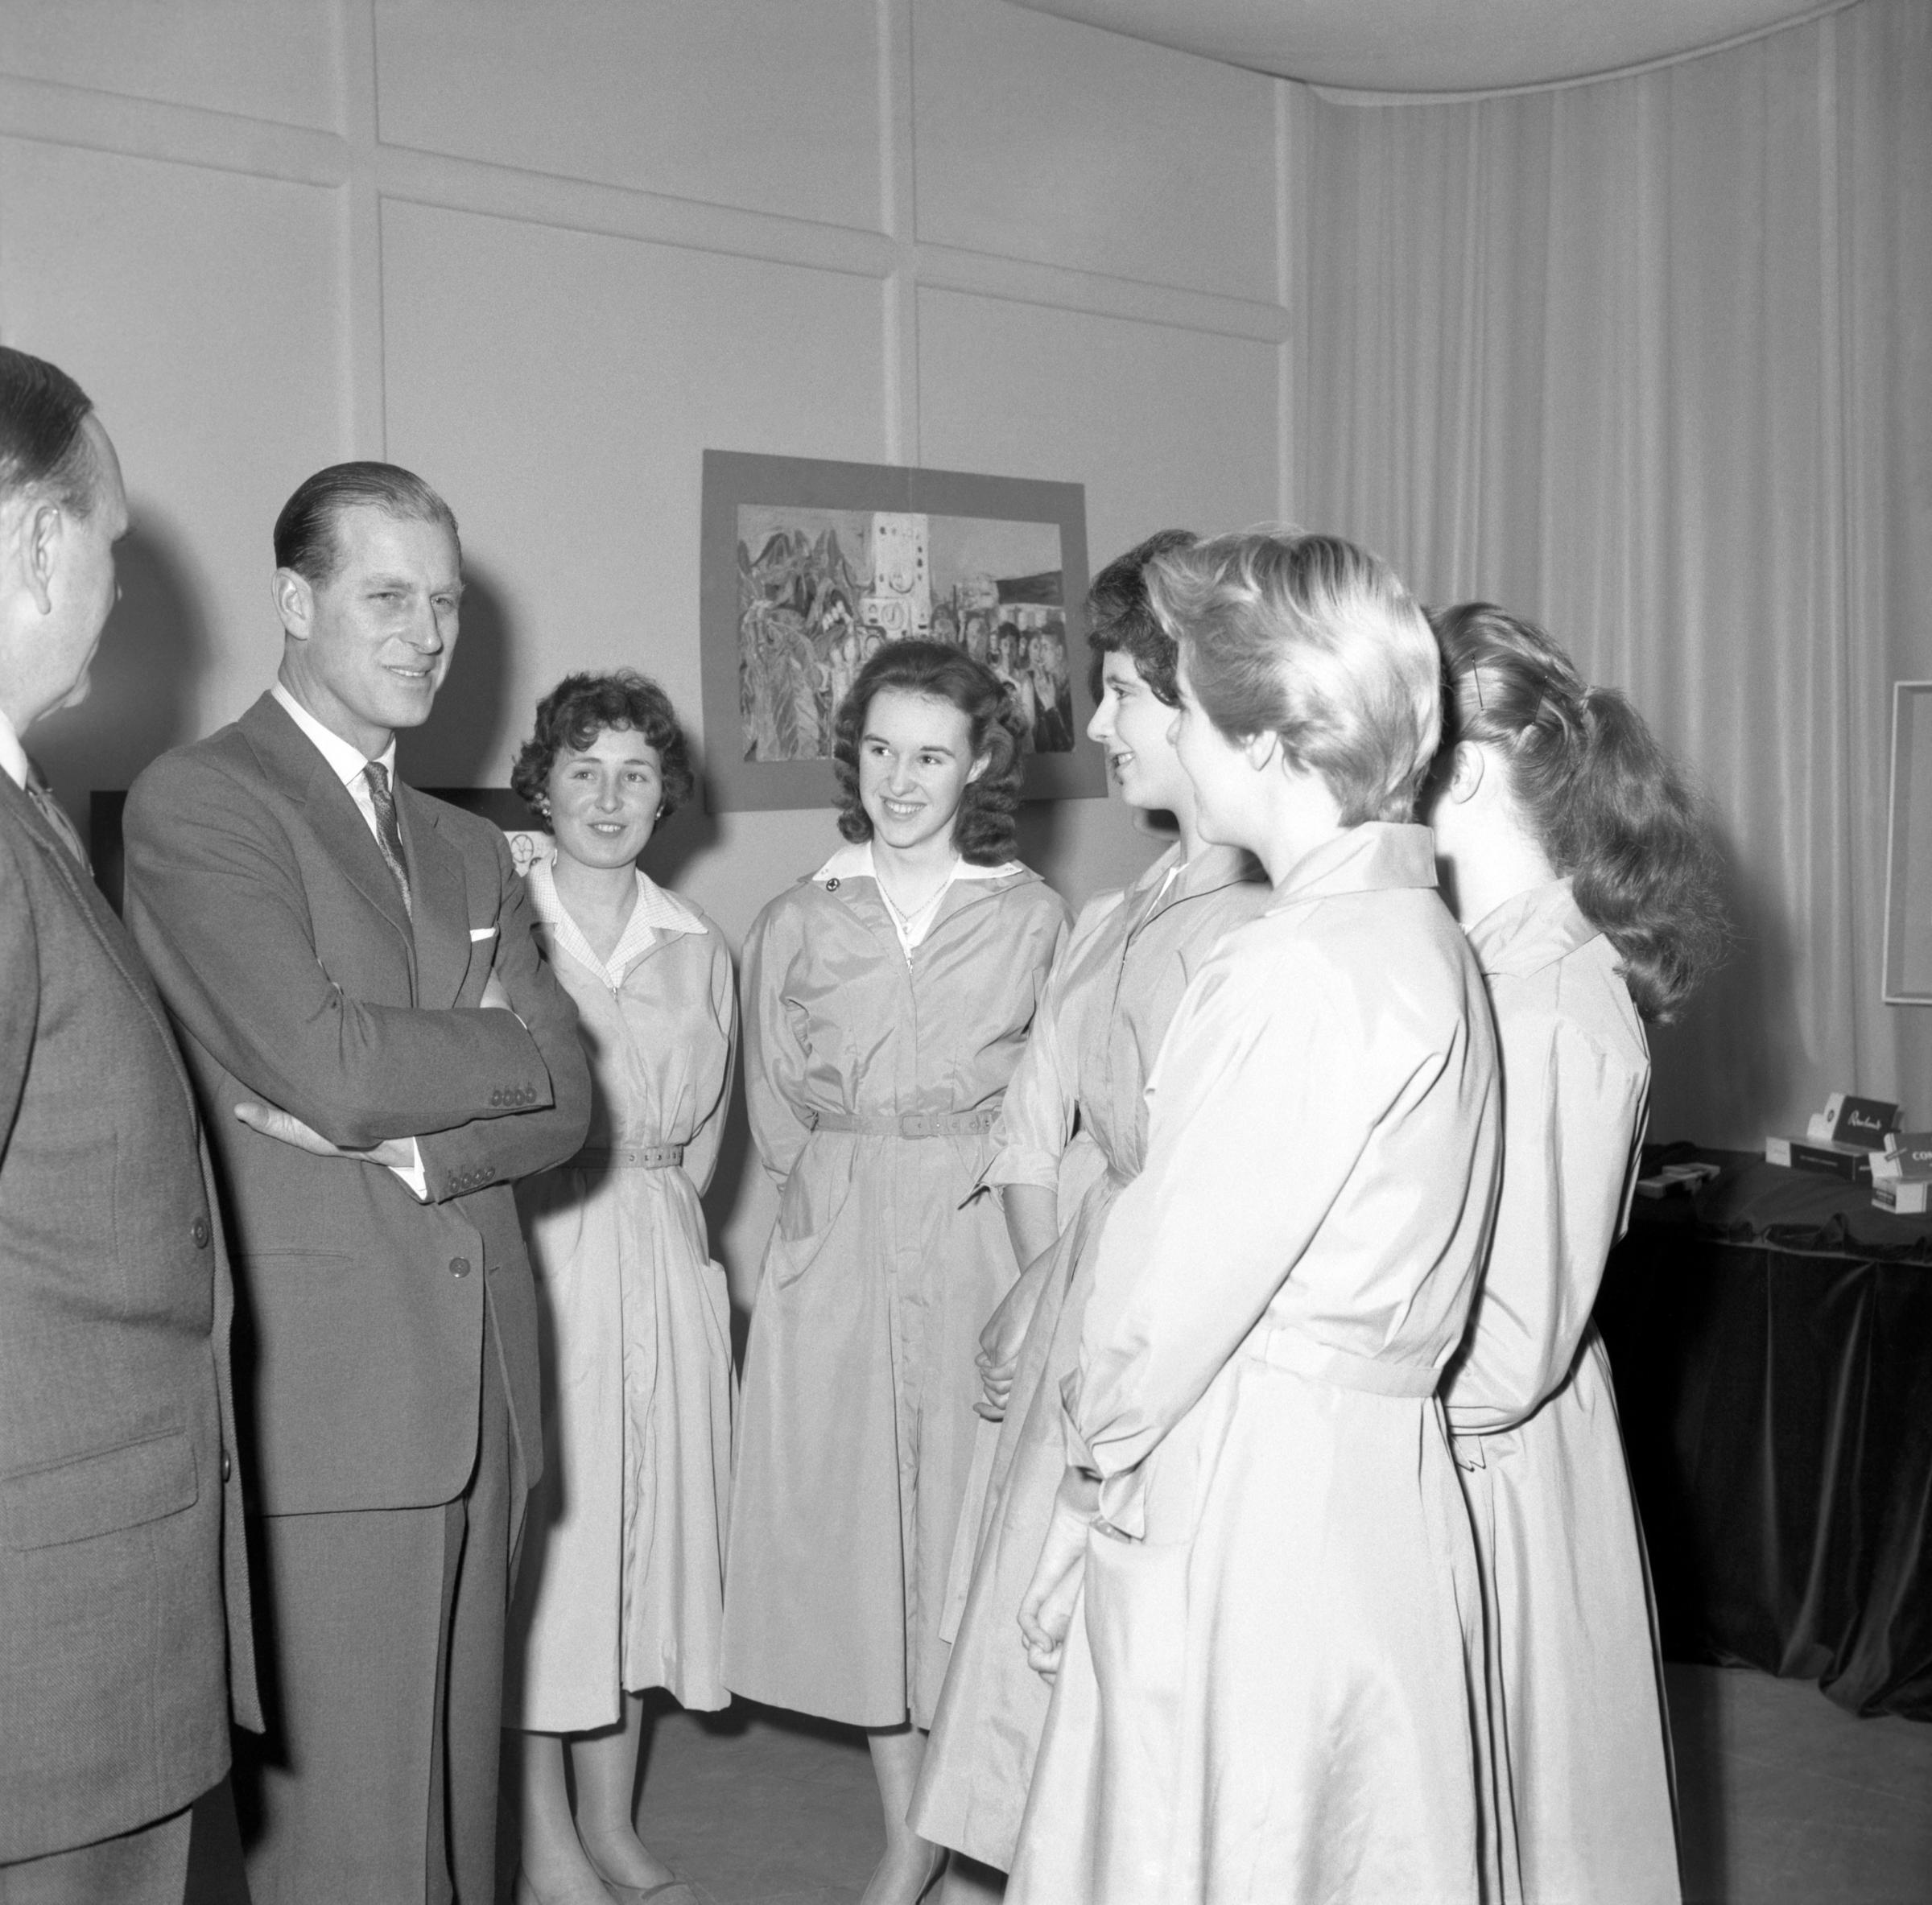 Duke of Edinburgh - Prince Philip chats to some of the girls who worked at the Carreras Tobacco Factory in Basildon during his visit to the premises in March 1960